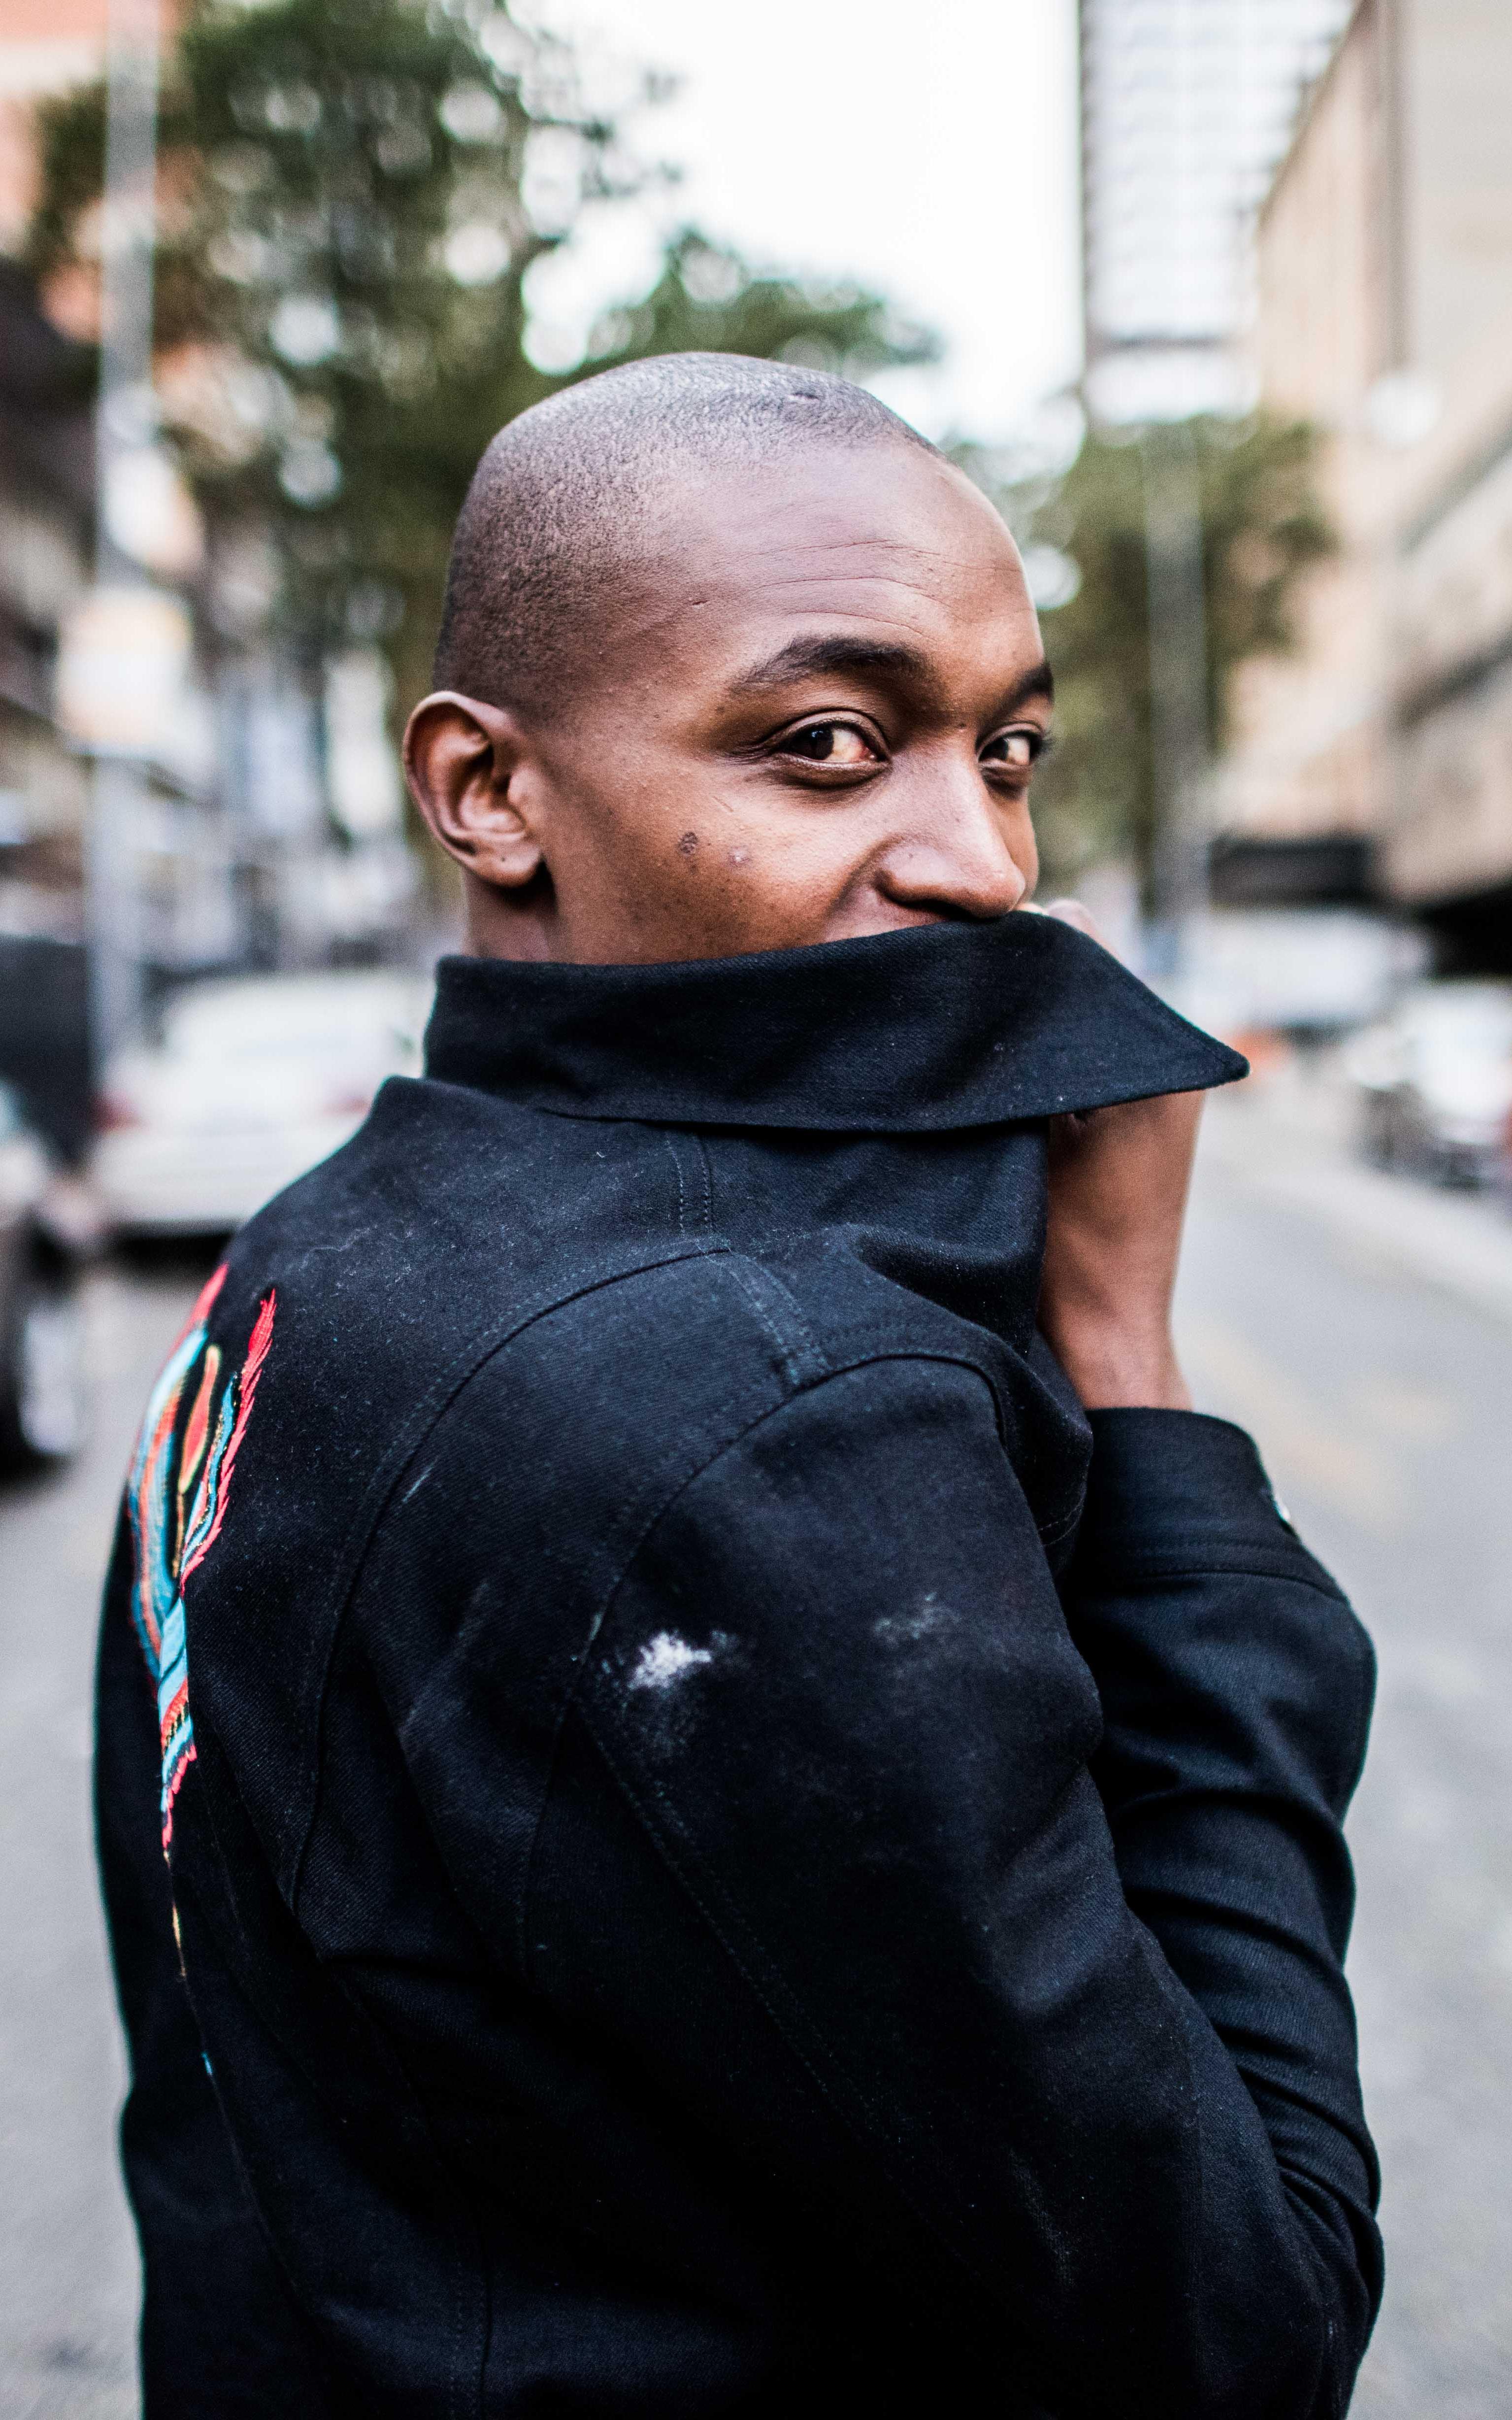 Man looks at the camera while covering his mouth with the collar of a leather jacket